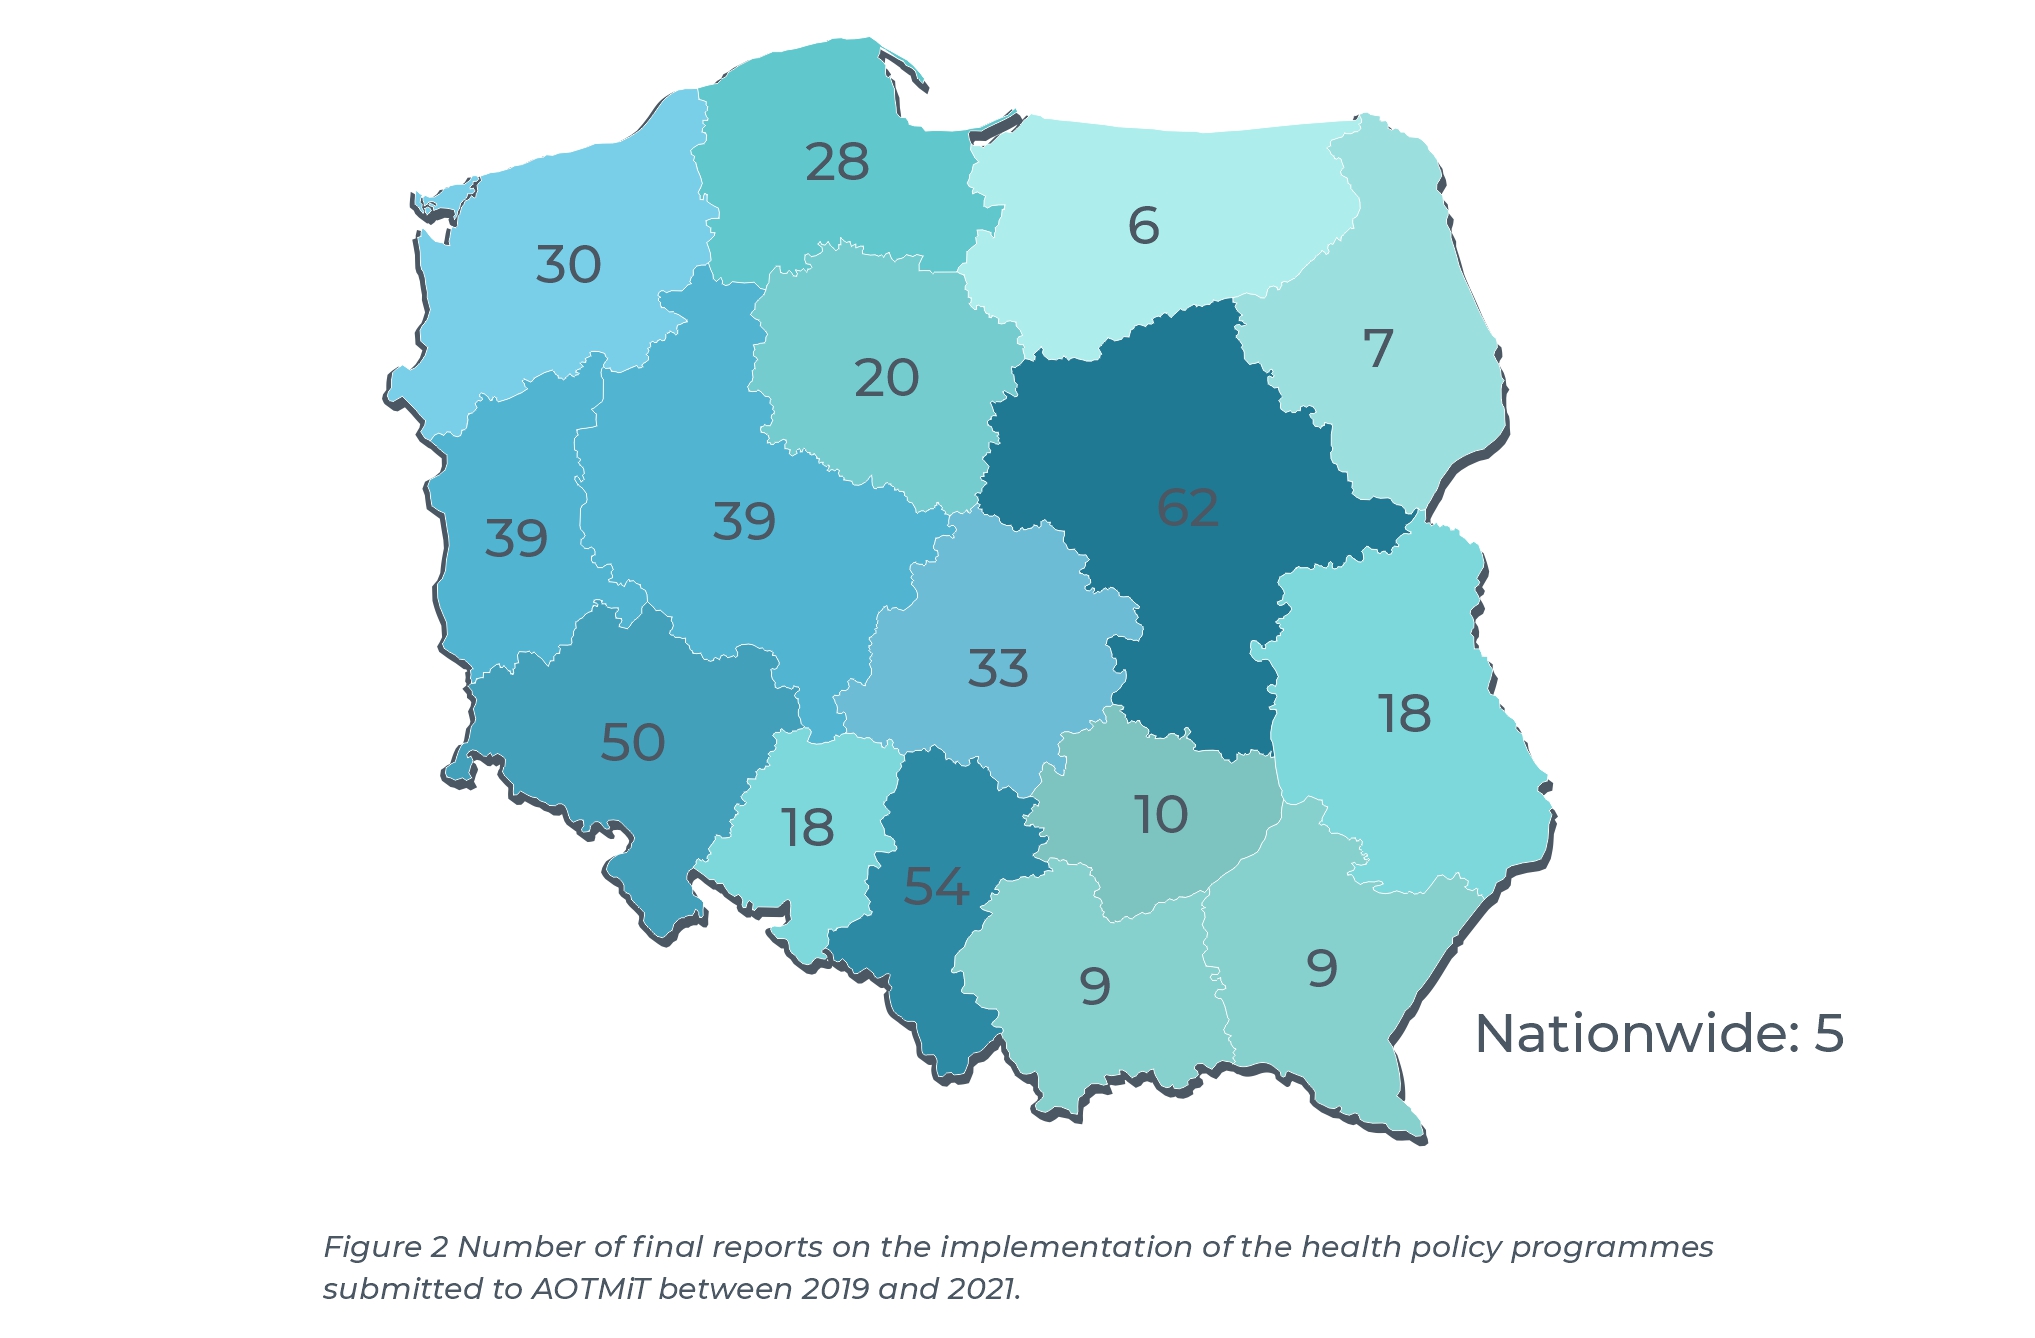 Figure 2 Number of final reports on the implementation of the health policy programmes submitted to AOTMiT between 2019 and 2021